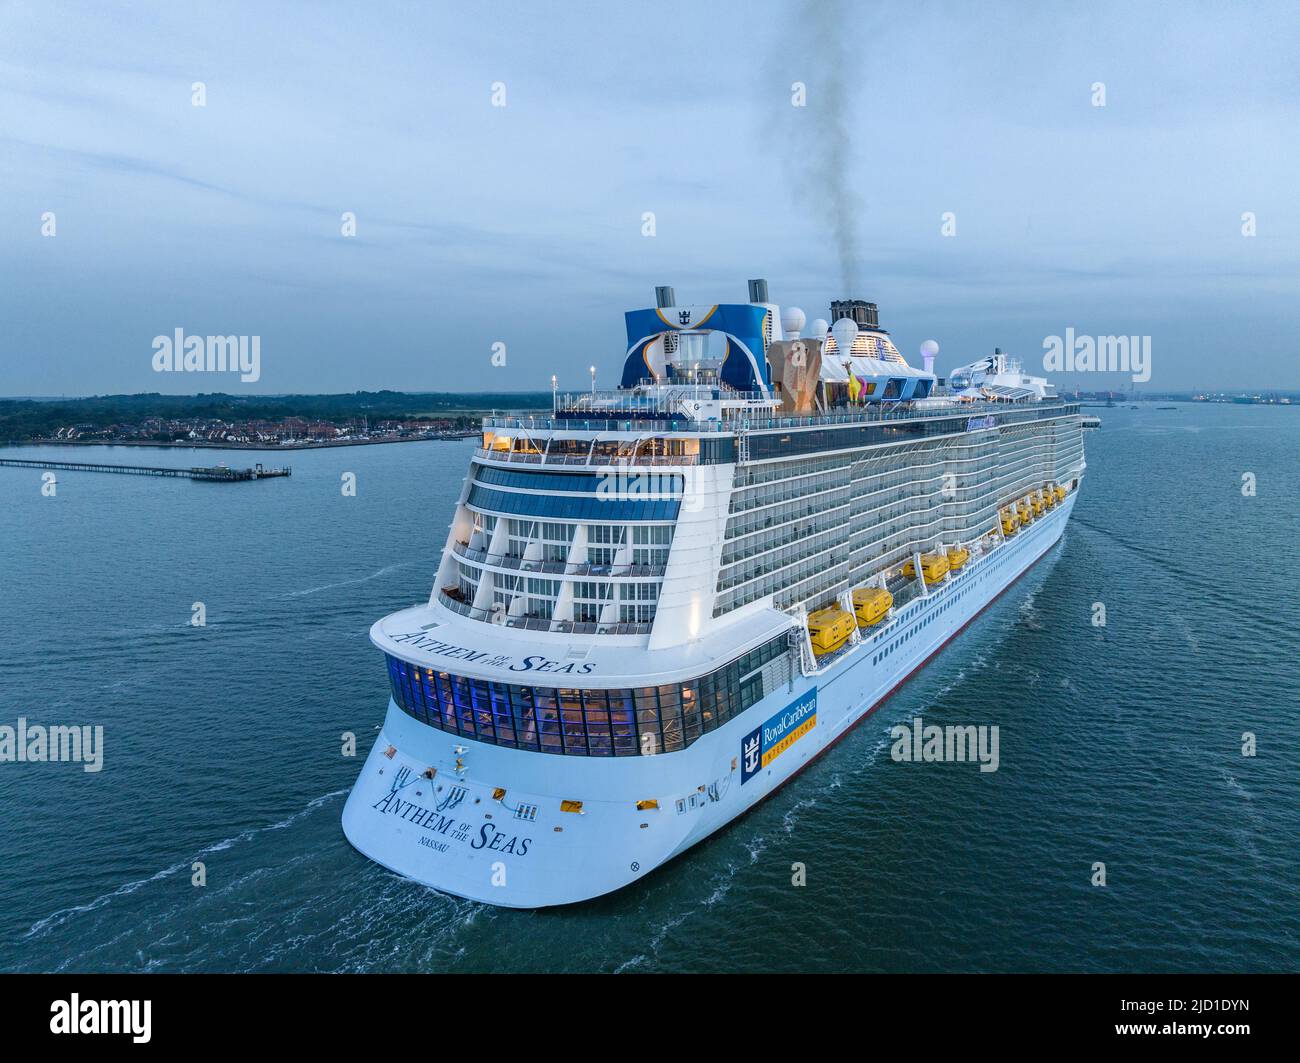 Shanghai, China - Jun 4, 2019. High Class Luxury Restaurant Interior Of  Spectrum Of The Seas Cruise Ship By Royal Caribbean In Sunny Day. Stock  Photo, Picture and Royalty Free Image. Image 125249509.